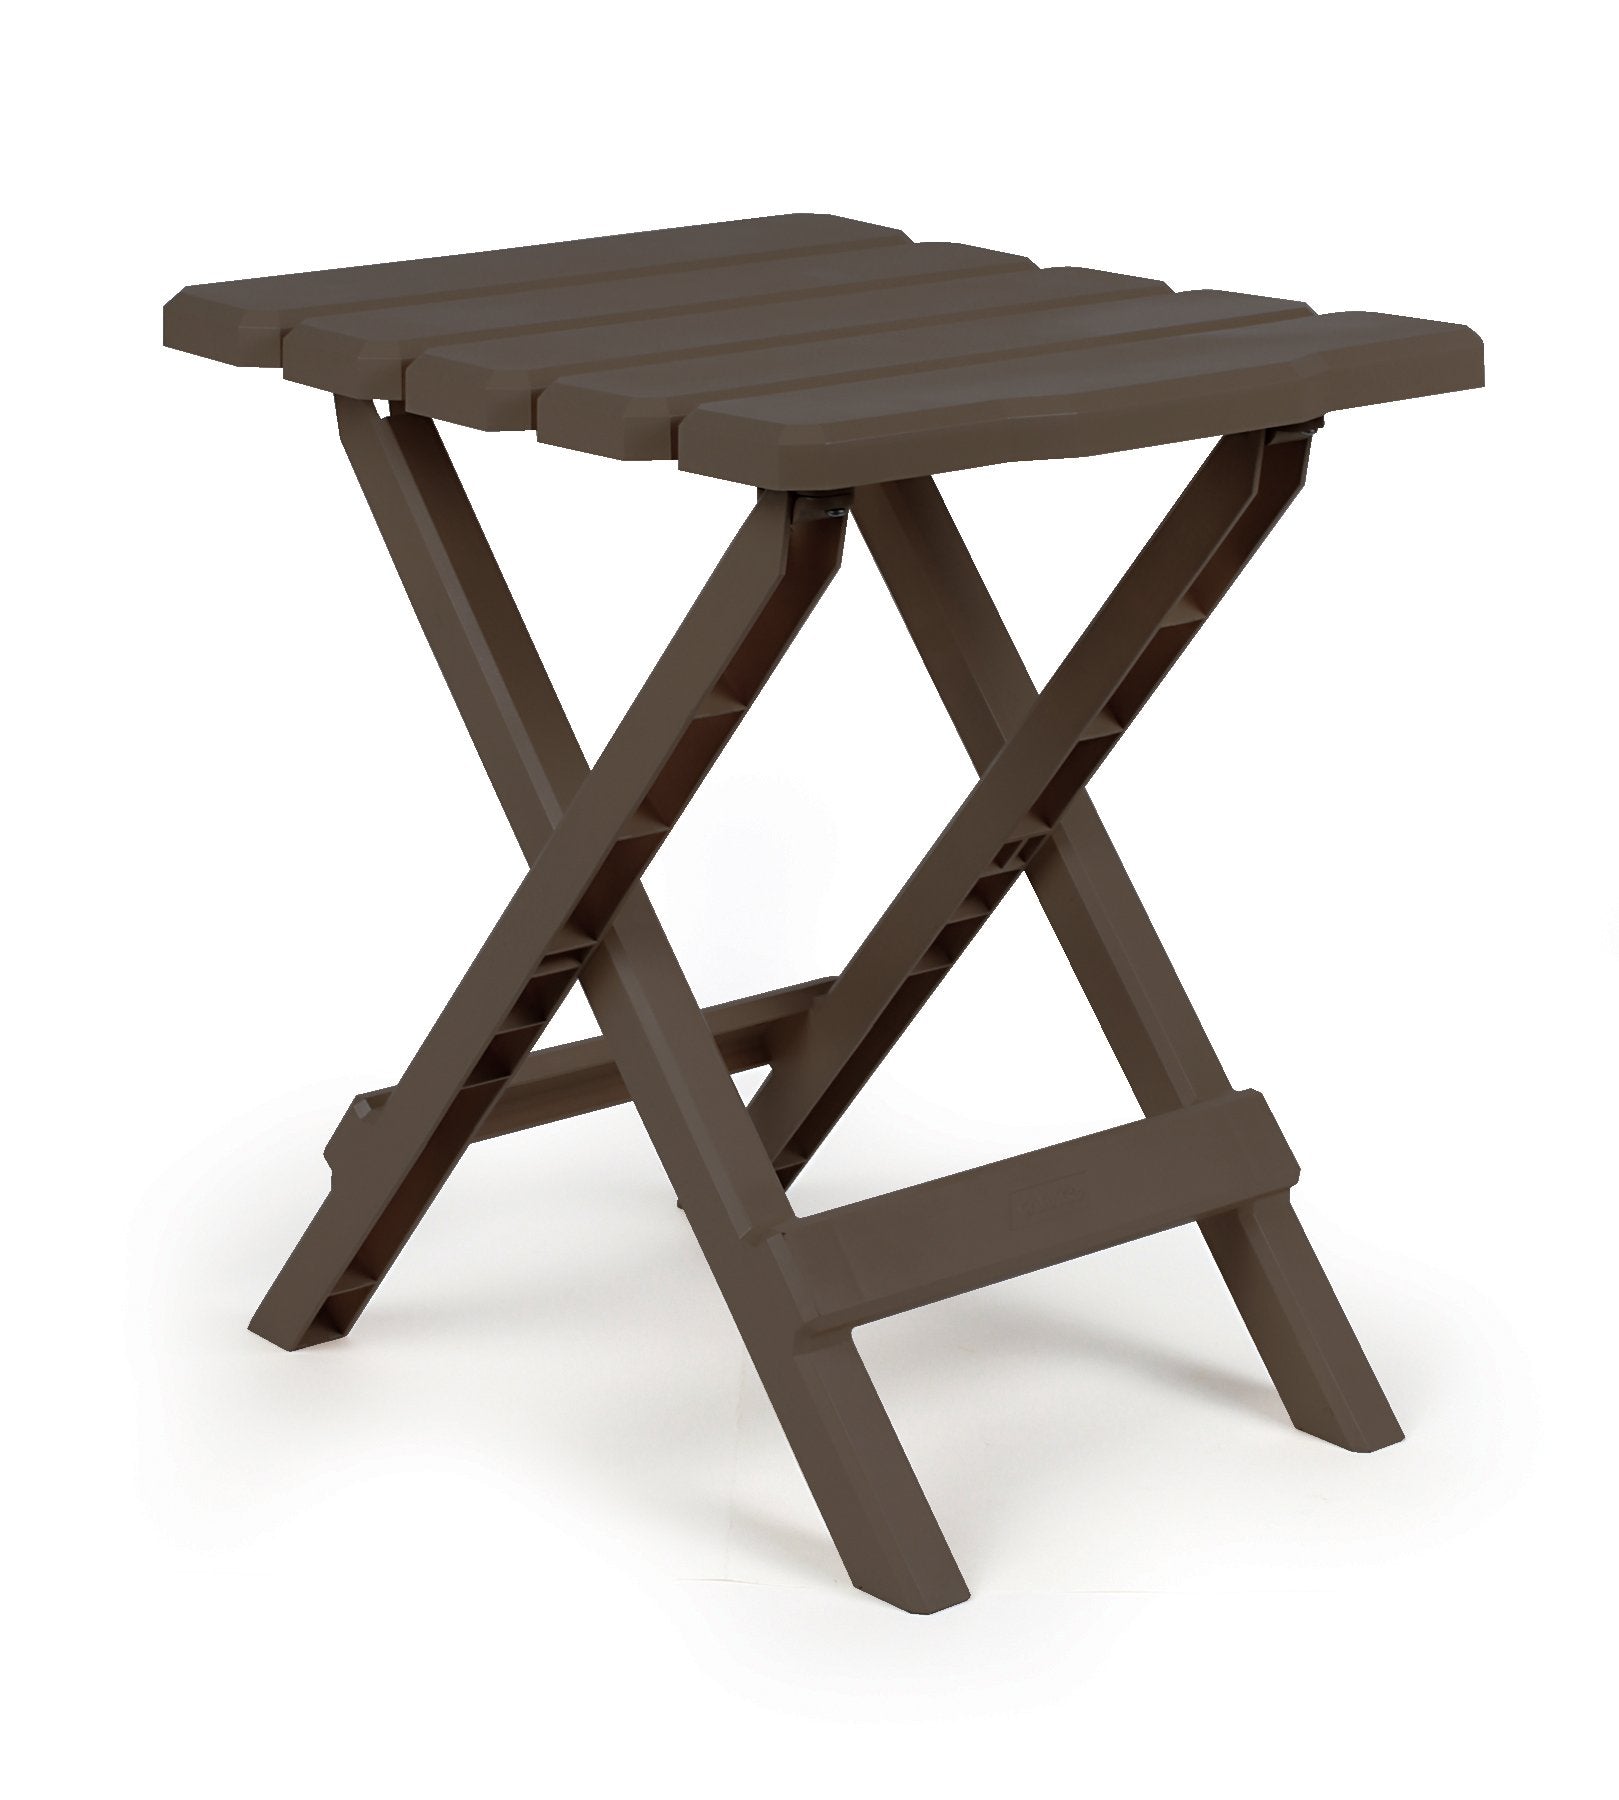 Camco Adirondack Portable Outdoor Folding Side Table, Perfect For The Beach, Camping, Picnics, Cookouts and More, Weatherproof and Rust Resistant - Mocha (51882)